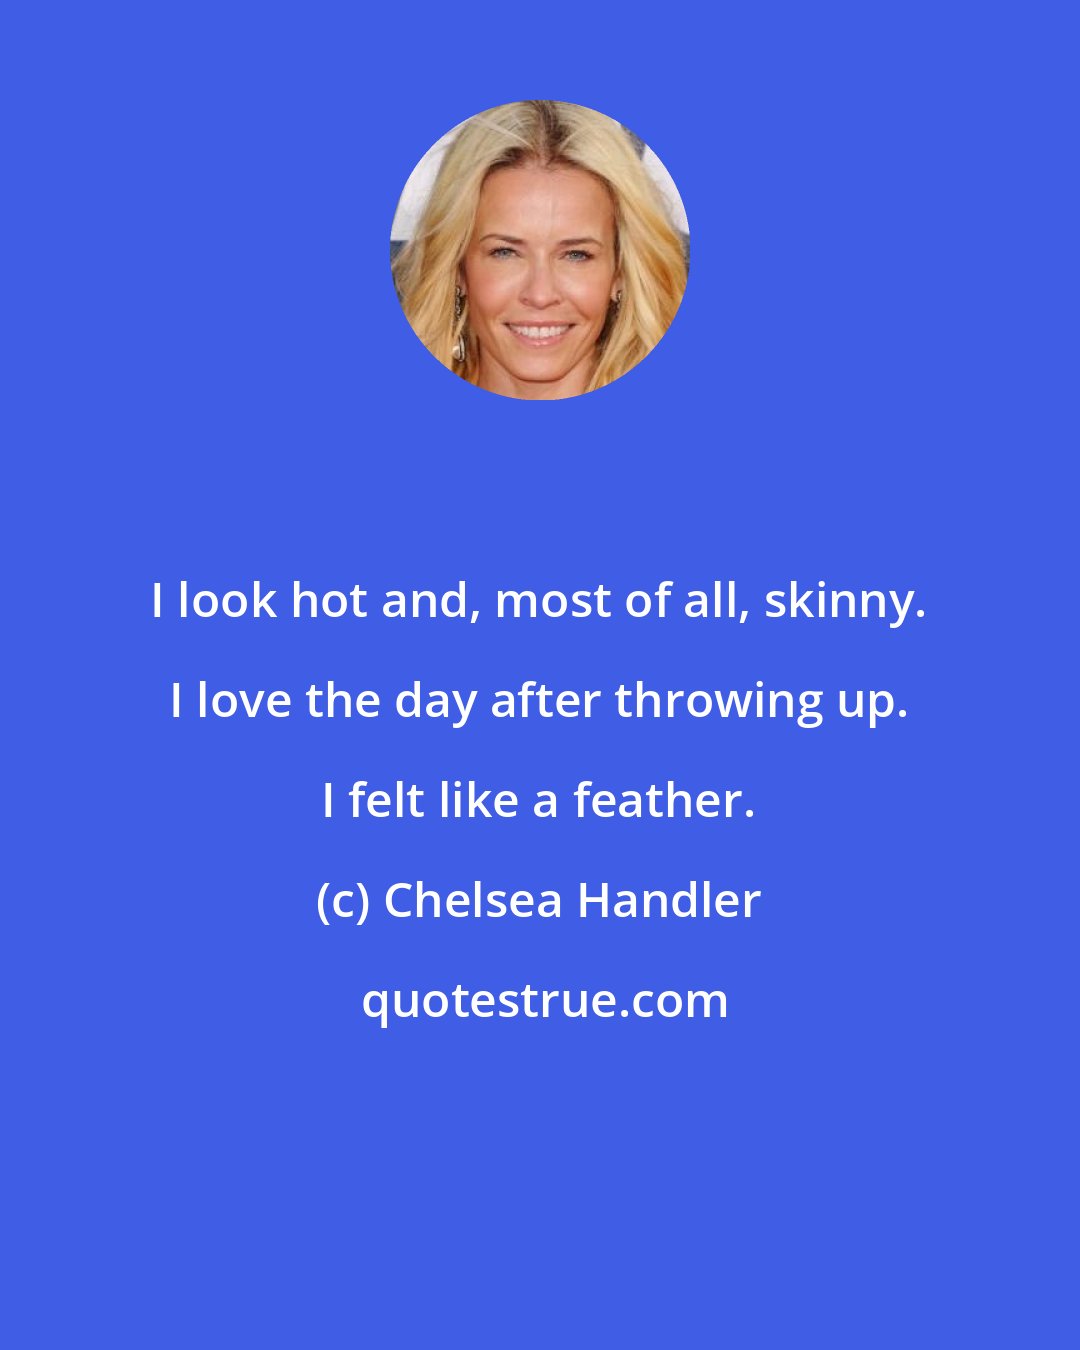 Chelsea Handler: I look hot and, most of all, skinny. I love the day after throwing up. I felt like a feather.